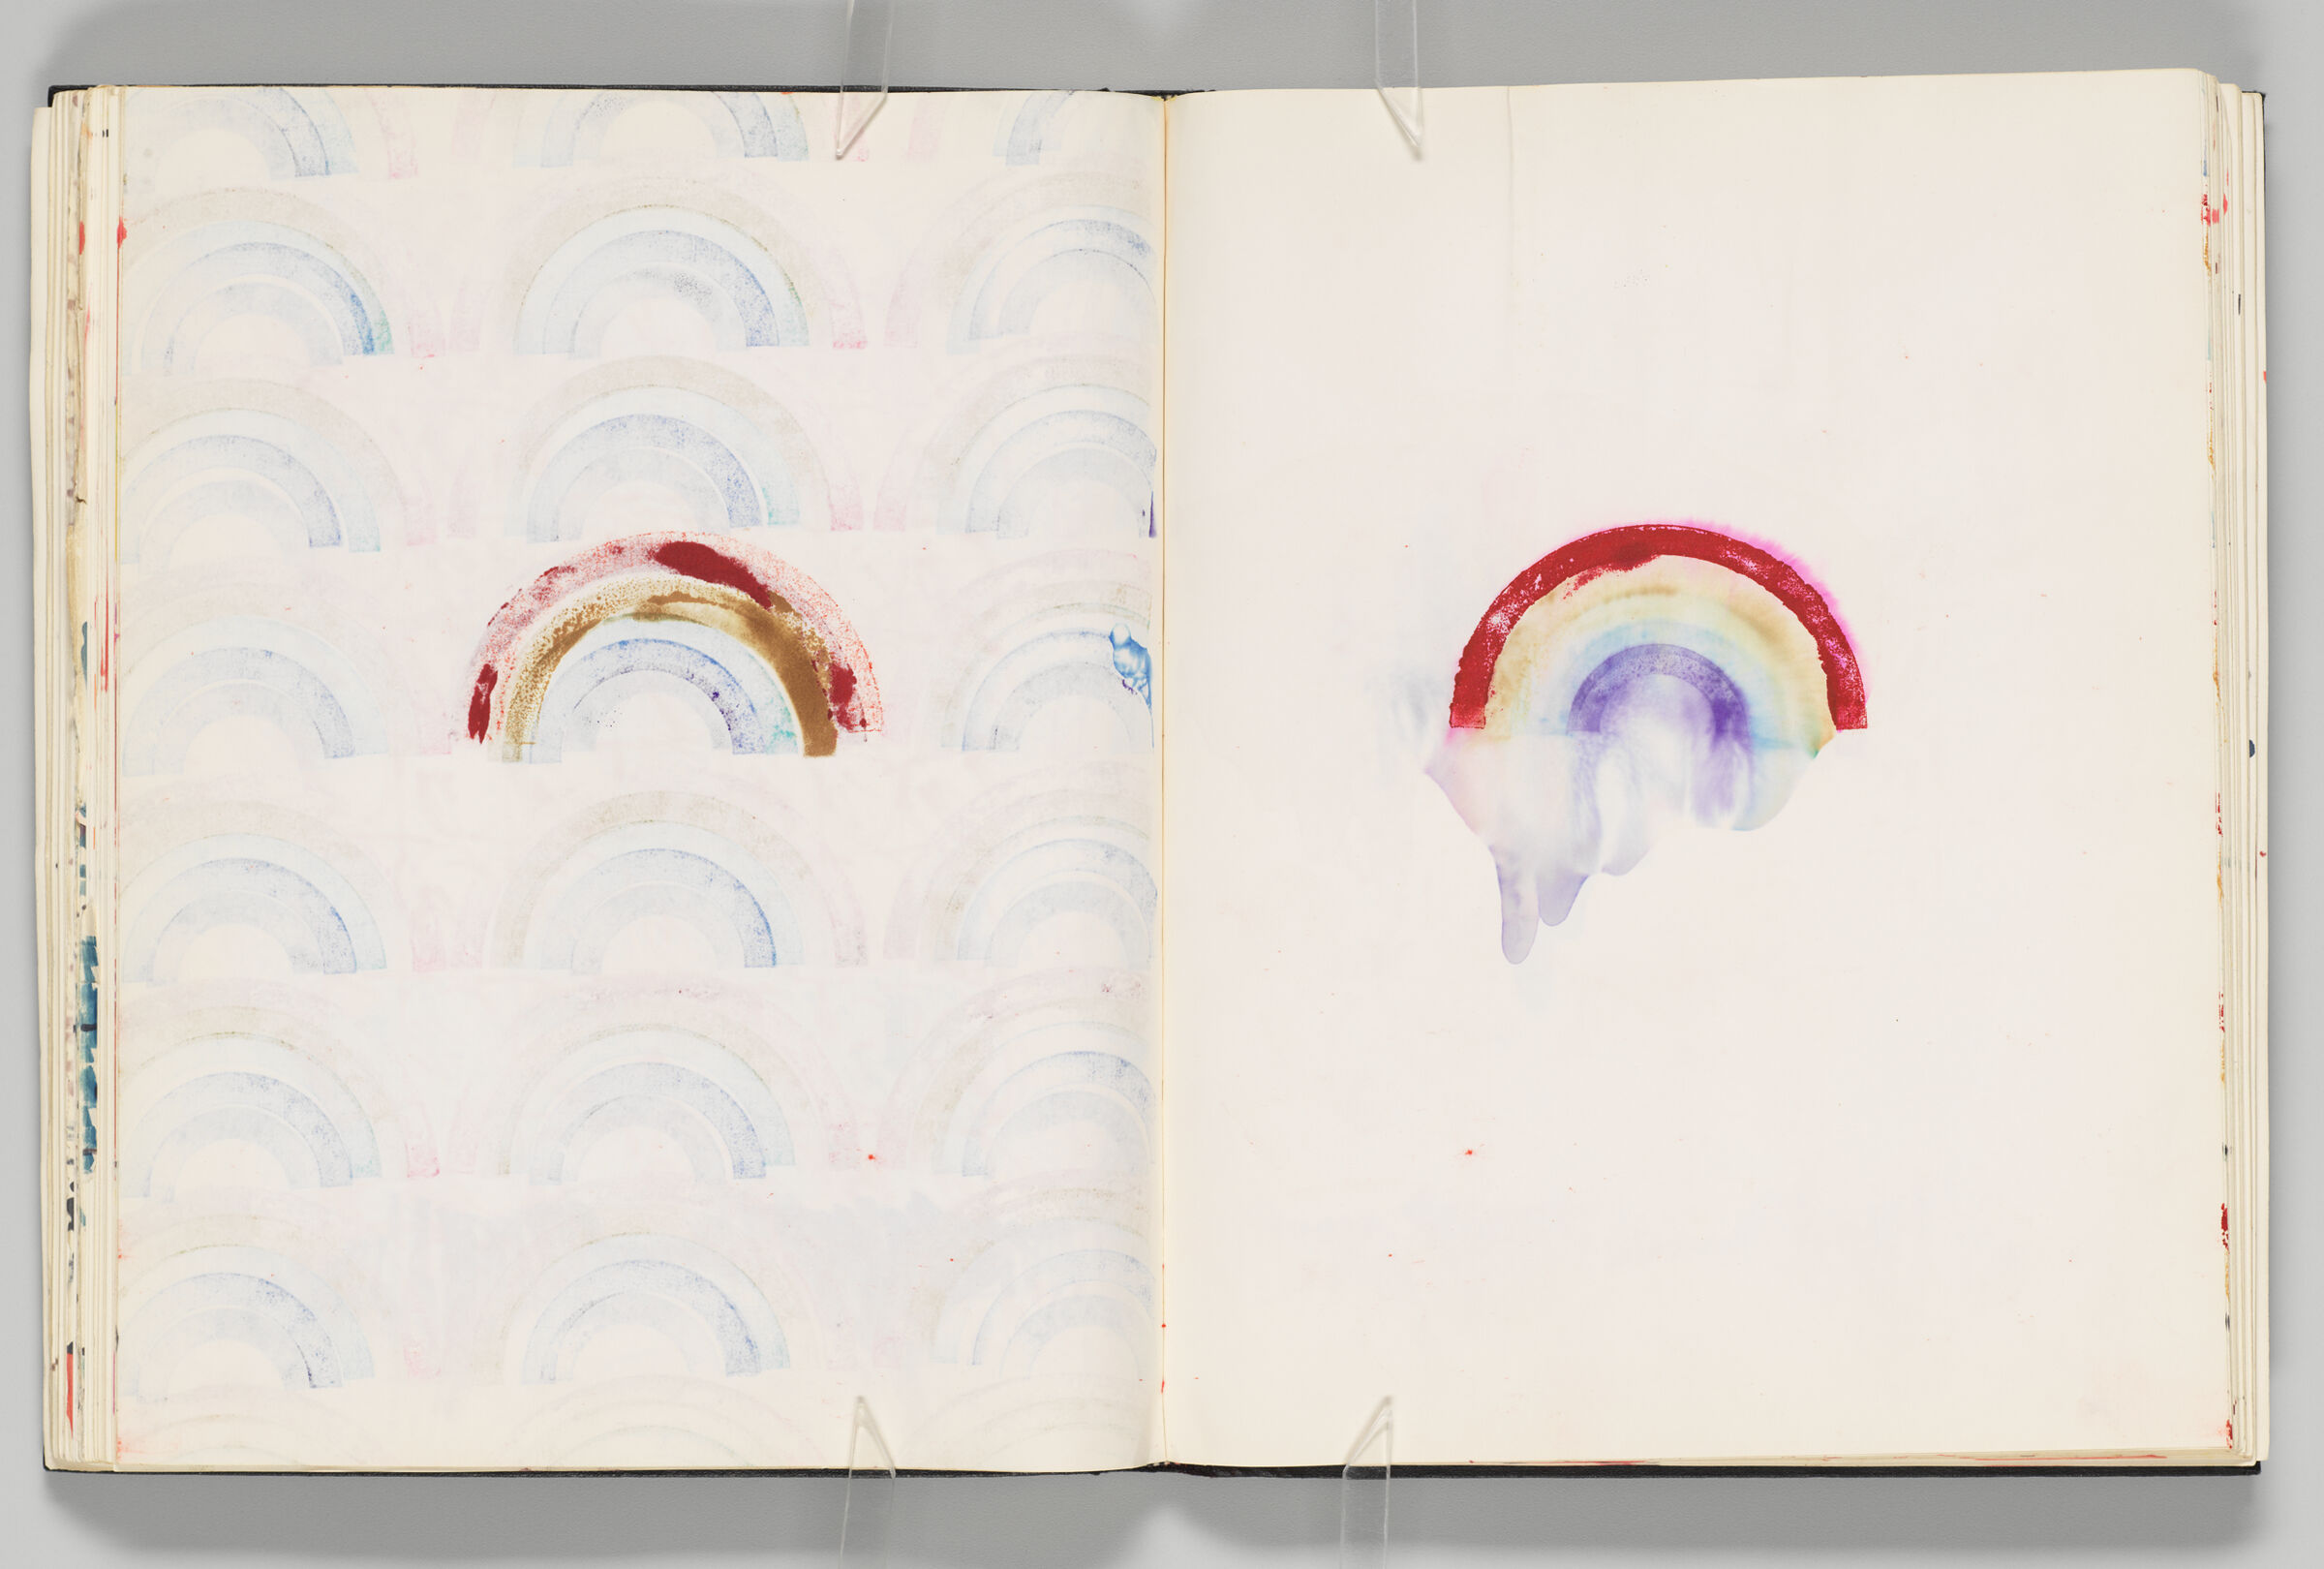 Untitled (Bleed-Through Of Previous Page, Left Page); Untitled (Rainbow Stamp Impression Manipulated With Water, Right Page)